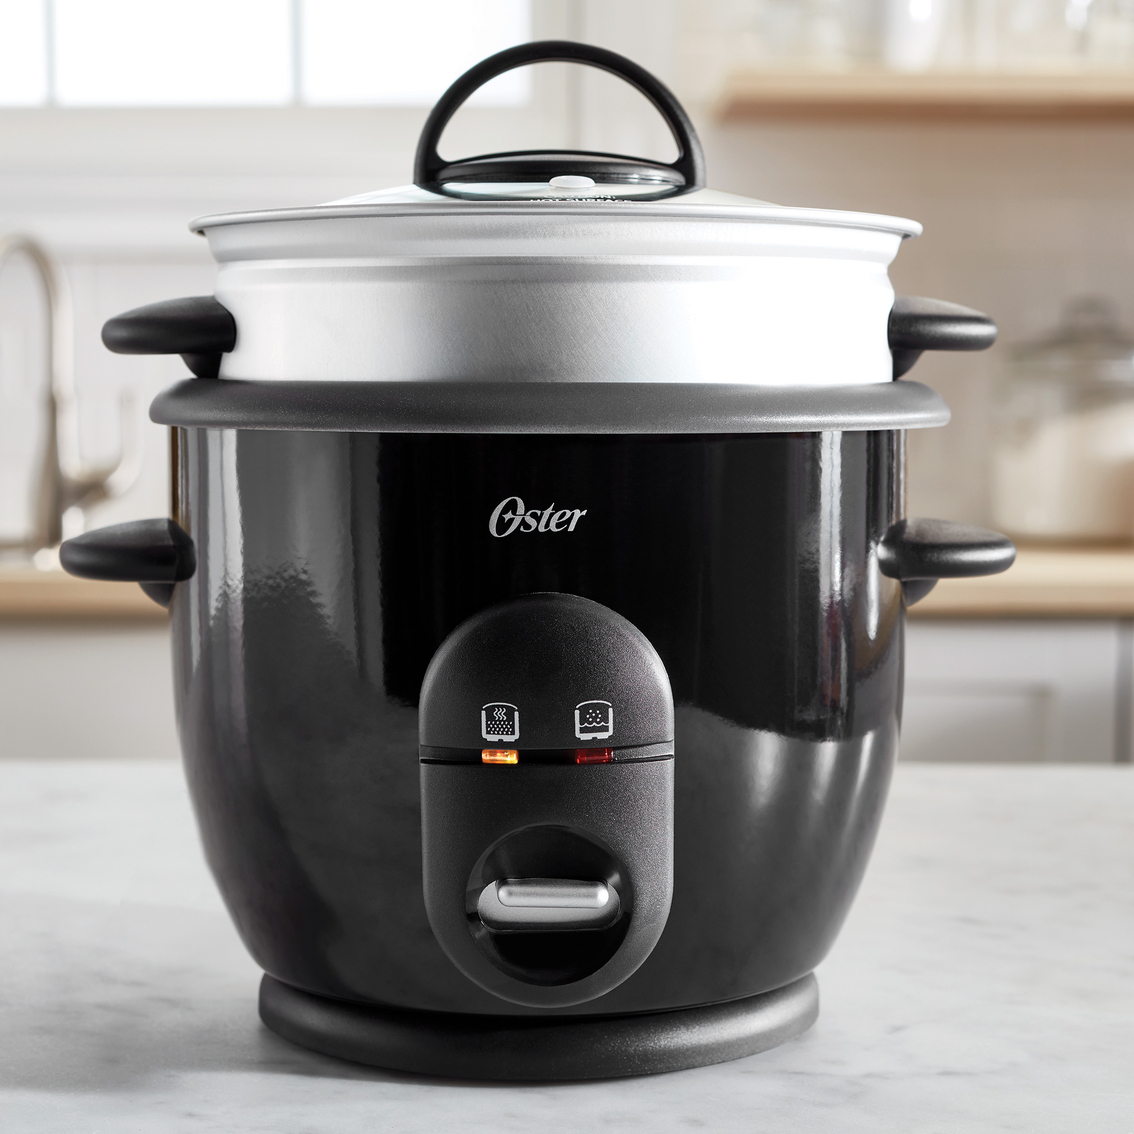 Oster DiamondForce Nonstick 6 Cup Electric Rice Cooker - Image 2 of 4